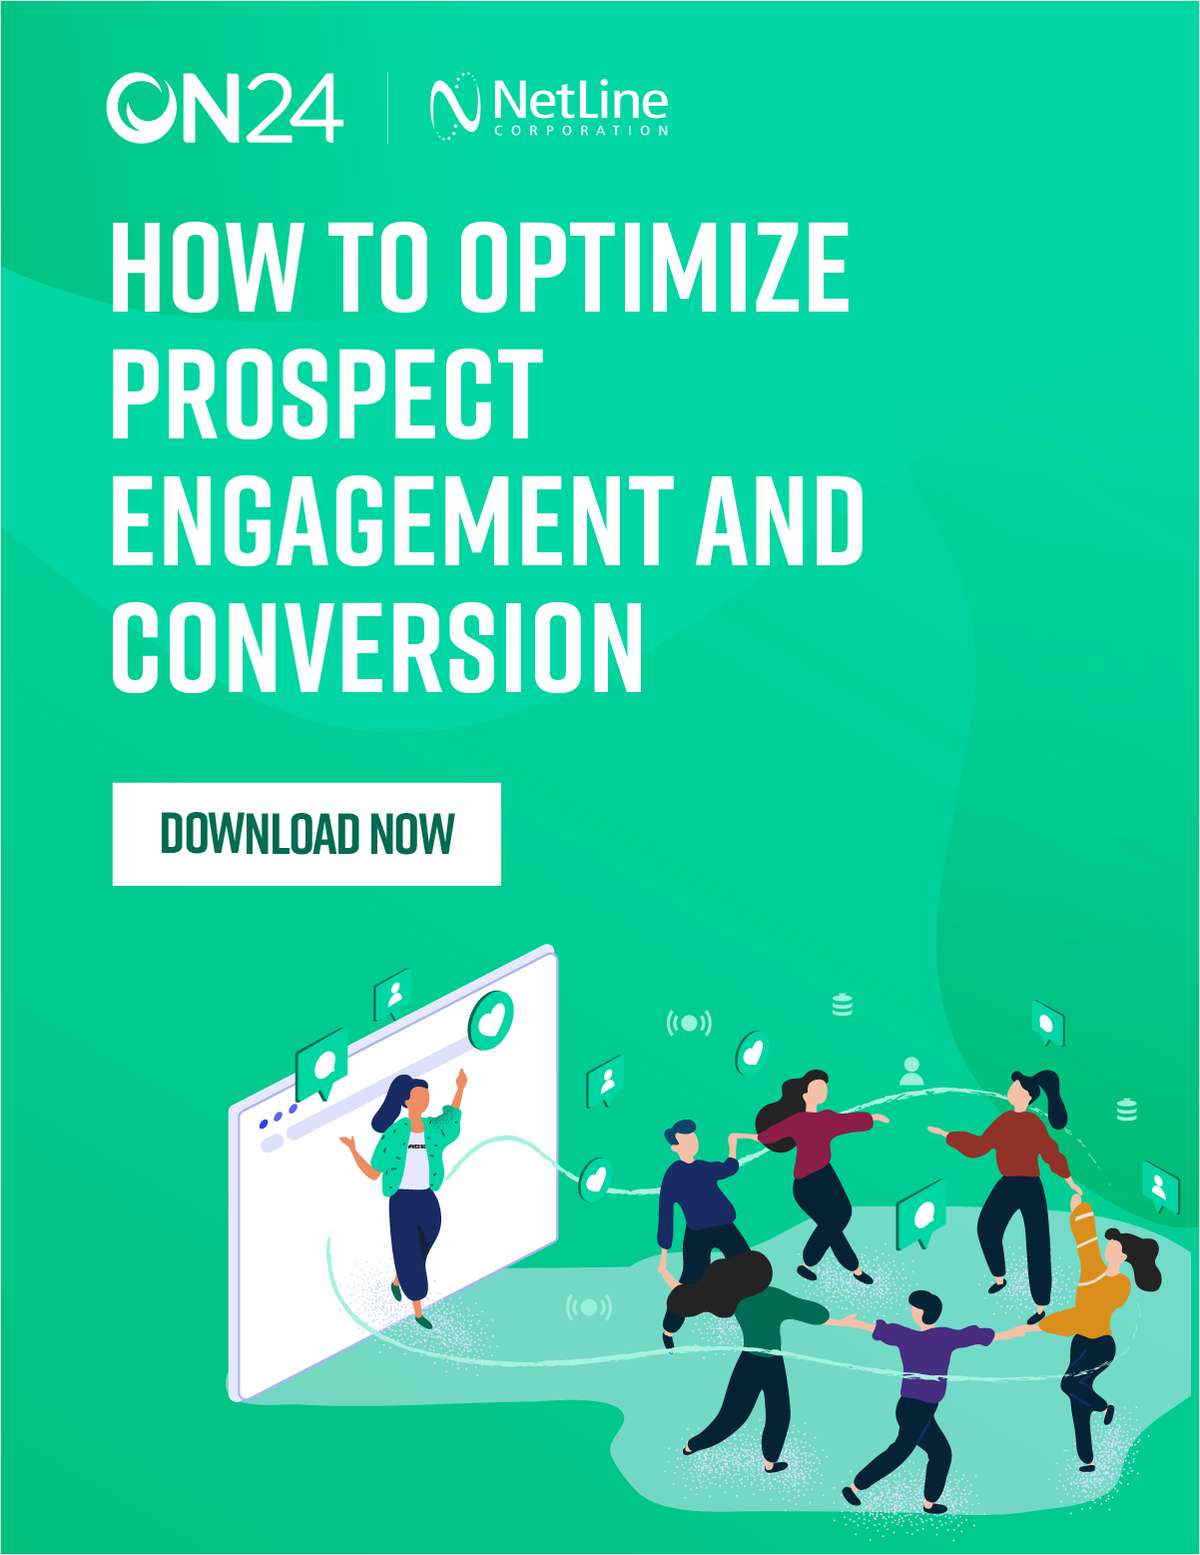 How to Optimize Prospect Engagement and Conversion